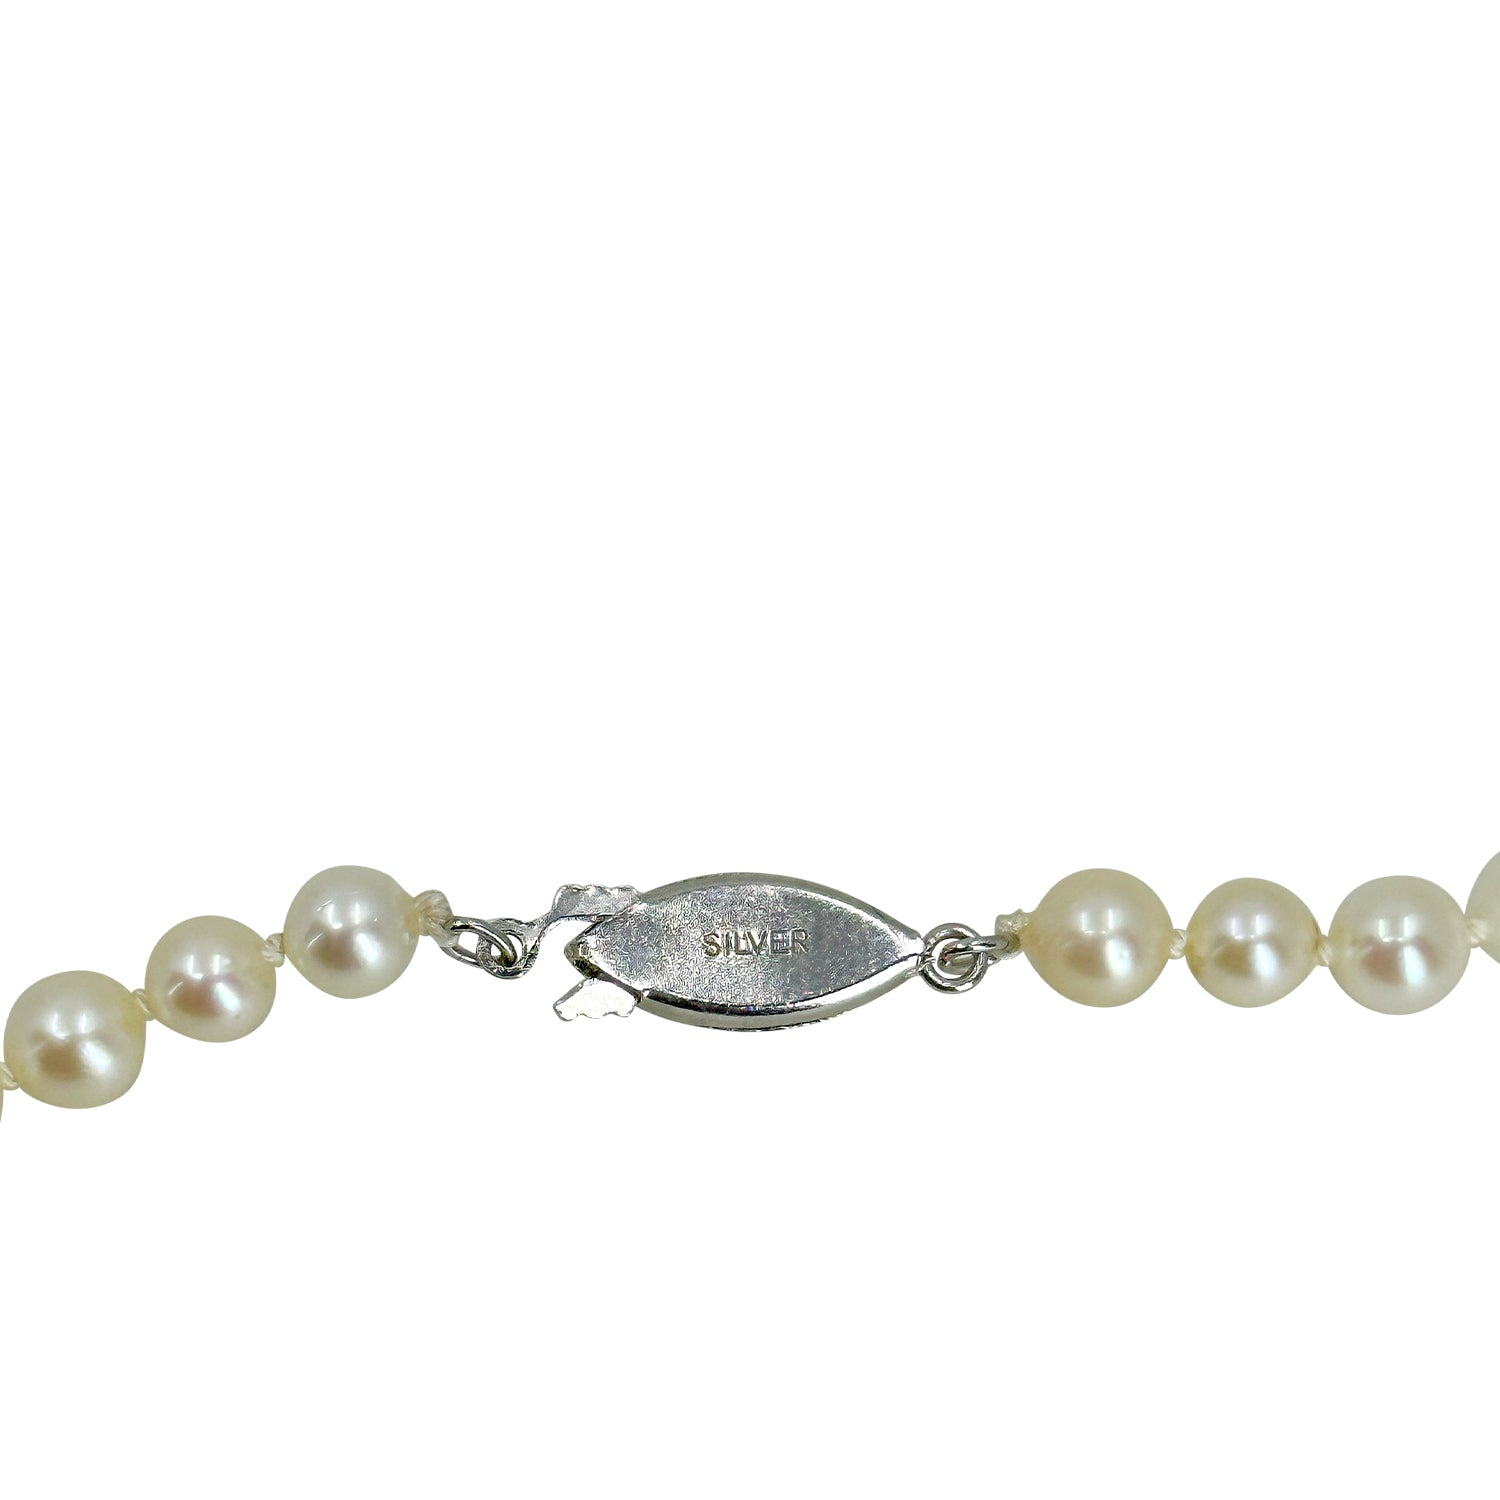 Retro Vintage Japanese Saltwater Akoya Cultured Pearl MCM Necklace - Sterling Silver 16.75 Inch